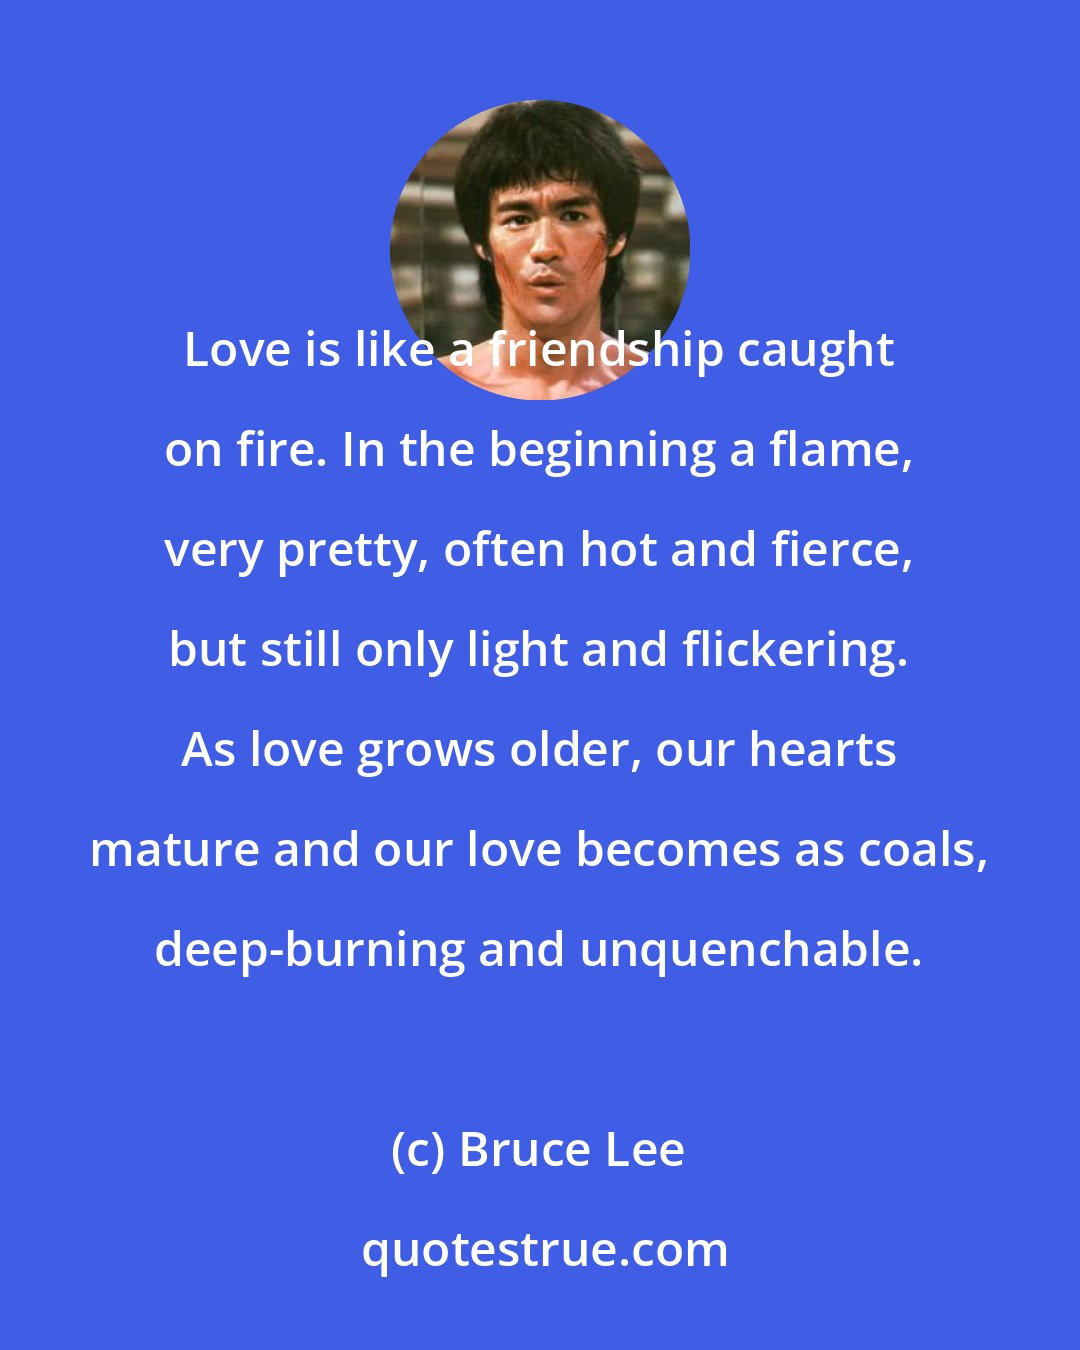 Bruce Lee: Love is like a friendship caught on fire. In the beginning a flame, very pretty, often hot and fierce, but still only light and flickering. As love grows older, our hearts mature and our love becomes as coals, deep-burning and unquenchable.